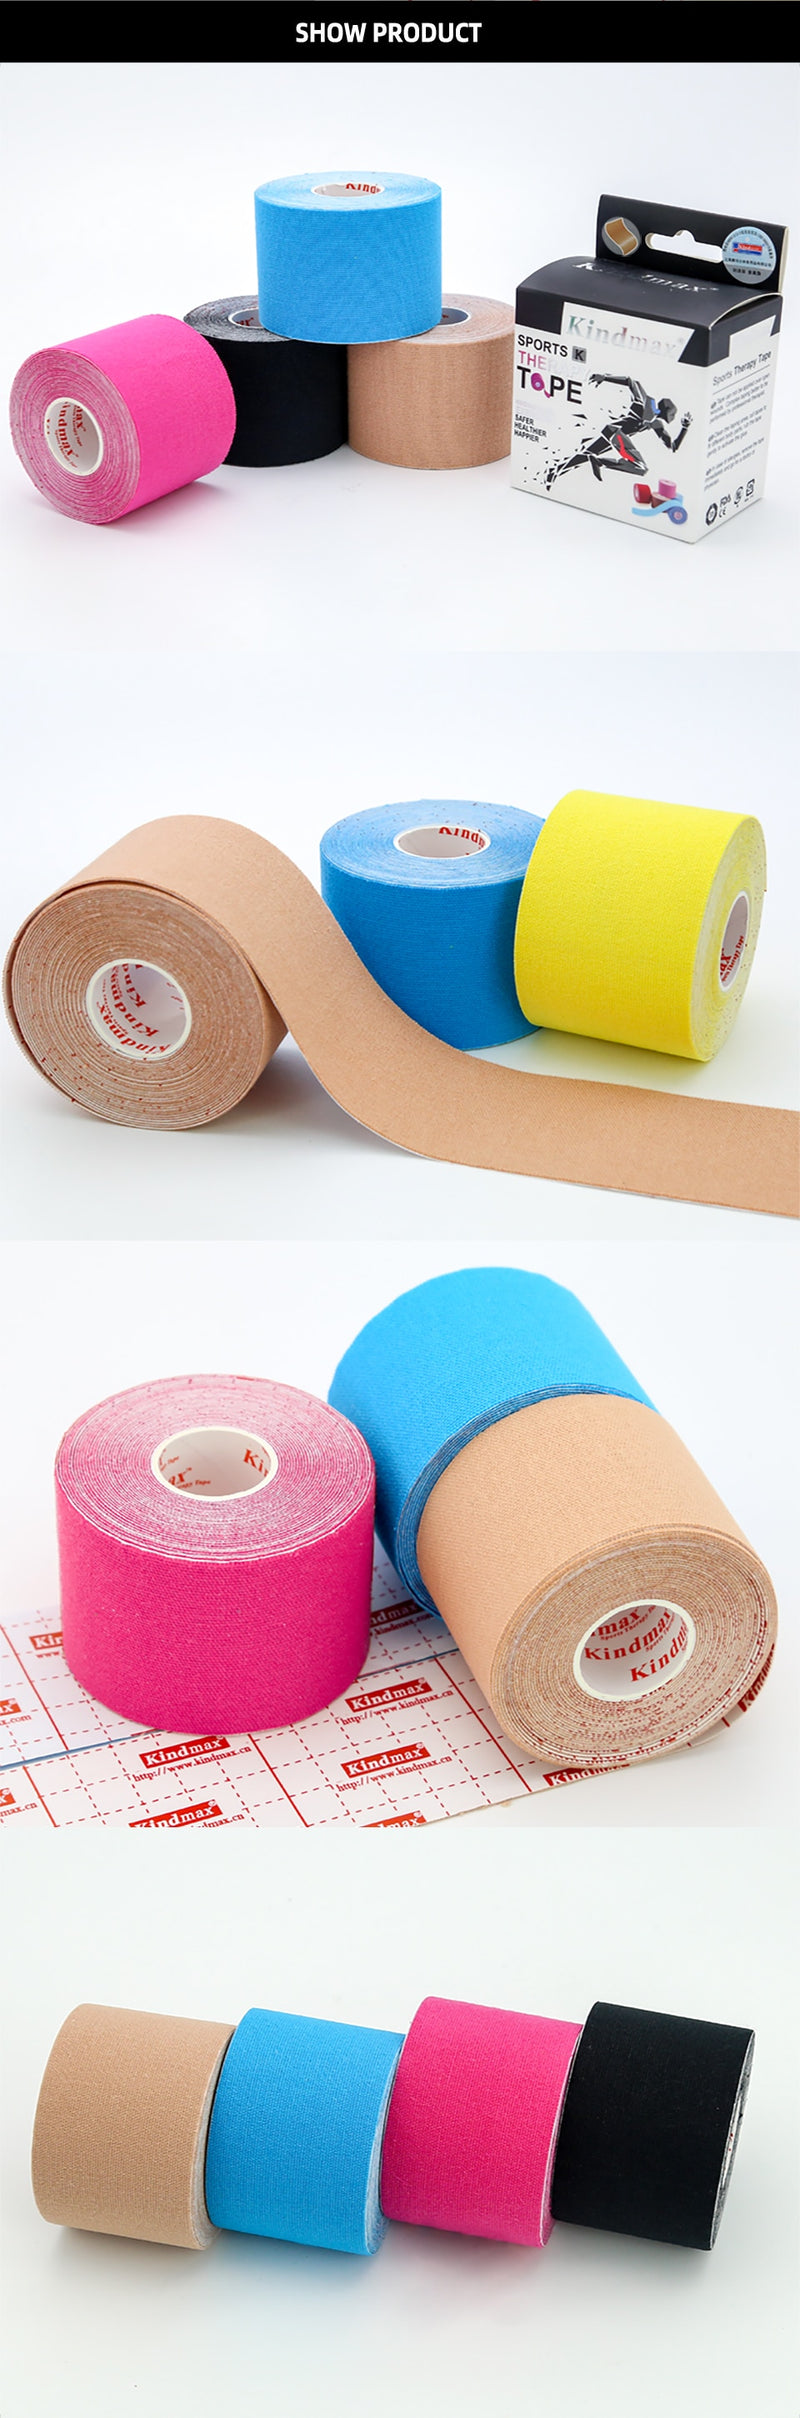 Kindmax Top Rayon Fibers Artificial Cotton Kinesiology Tape Roll Elastic Sports Tape for Knee Elow Shoulder Muscle Pain Relief - KiwisLove